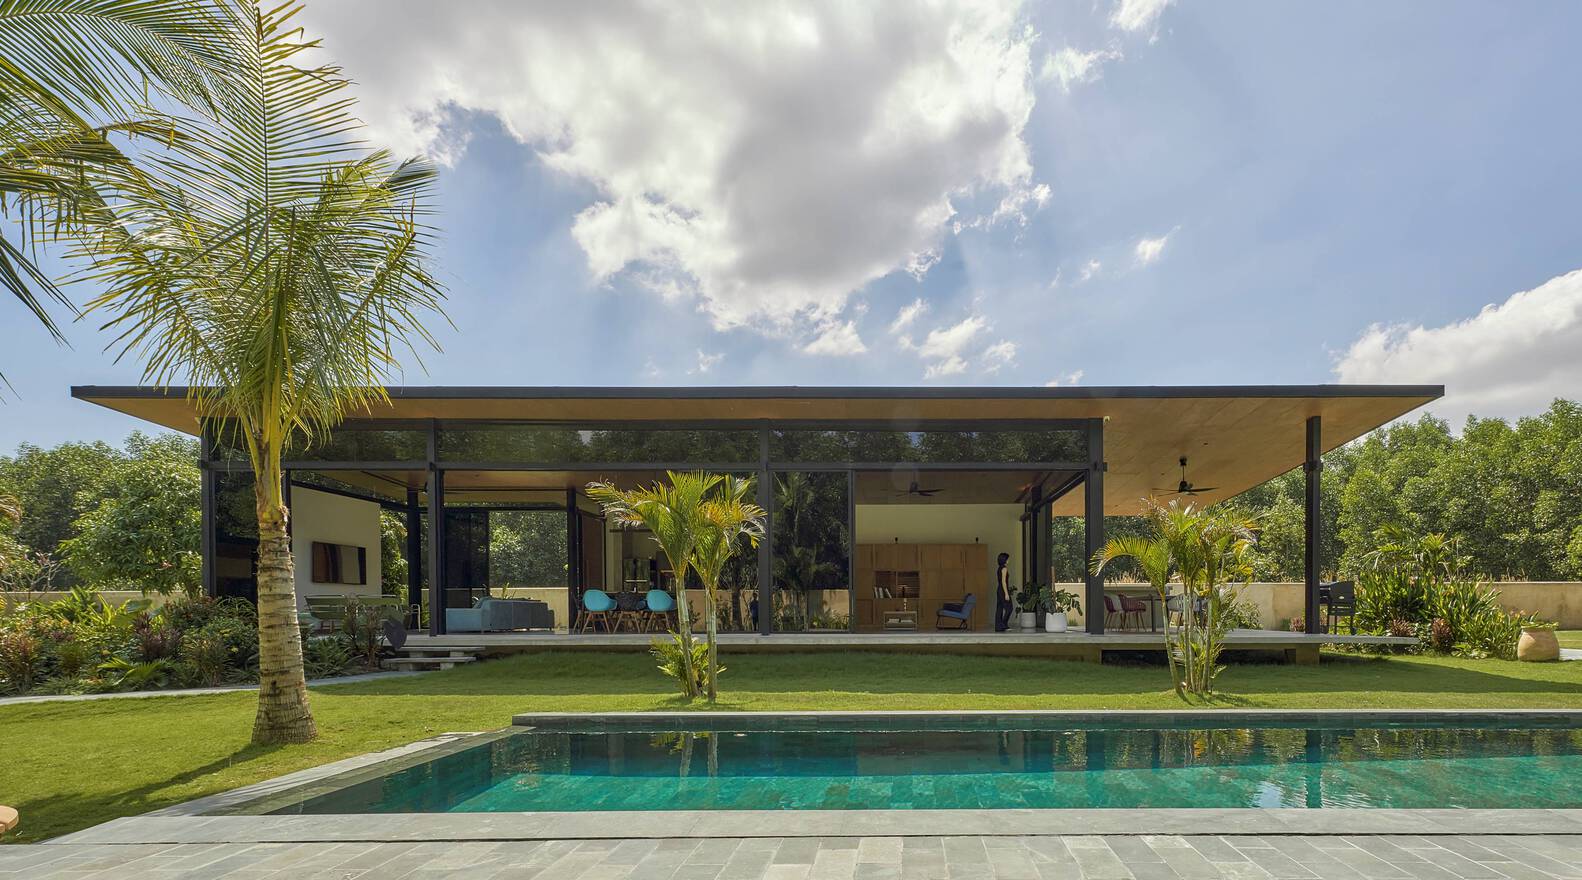 The exterior of the Bioclimatic Tropical Villa. Photo by Phu Dao.